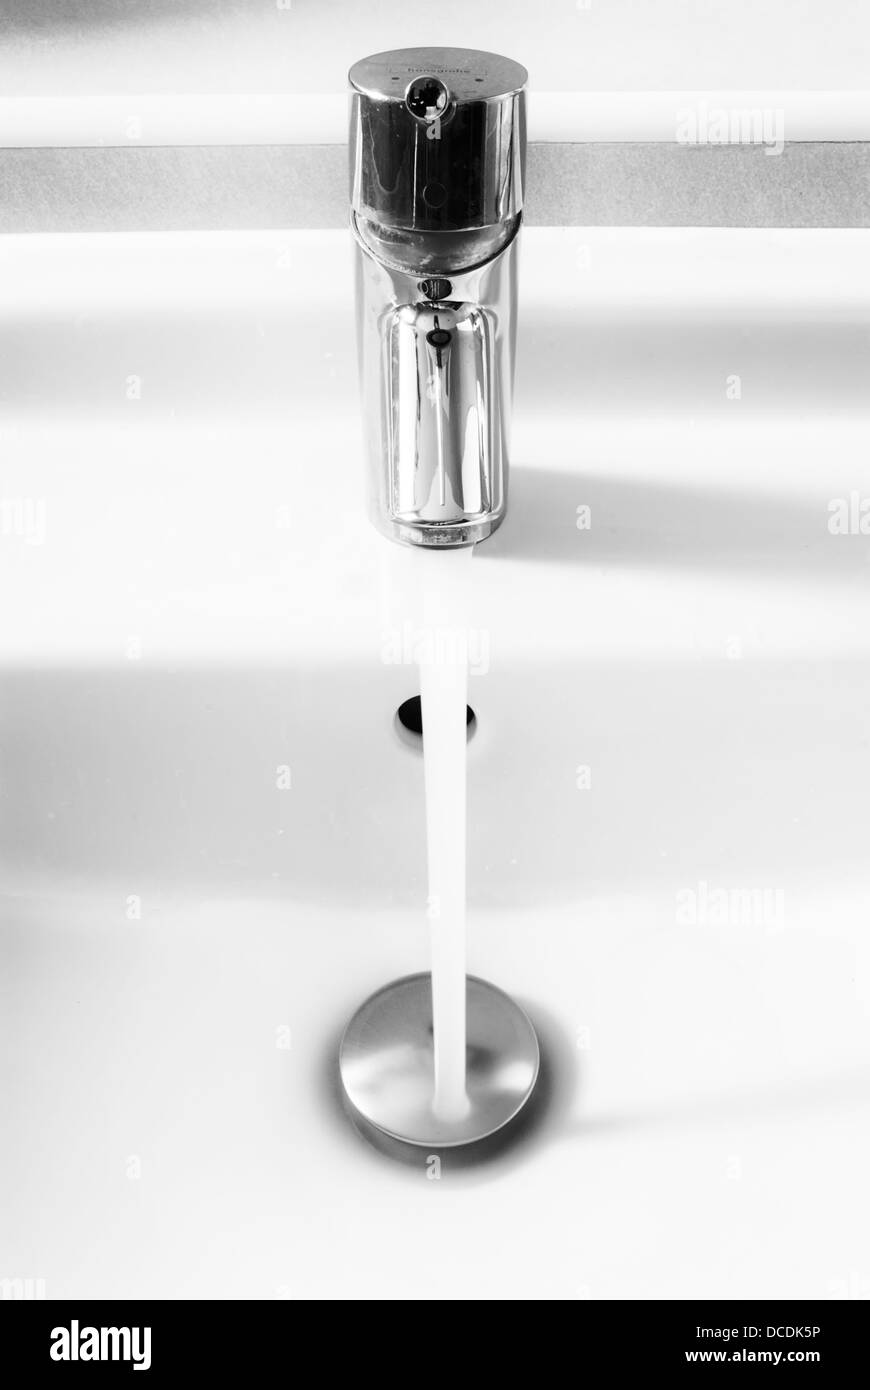 Bathroom tap with water Stock Photo